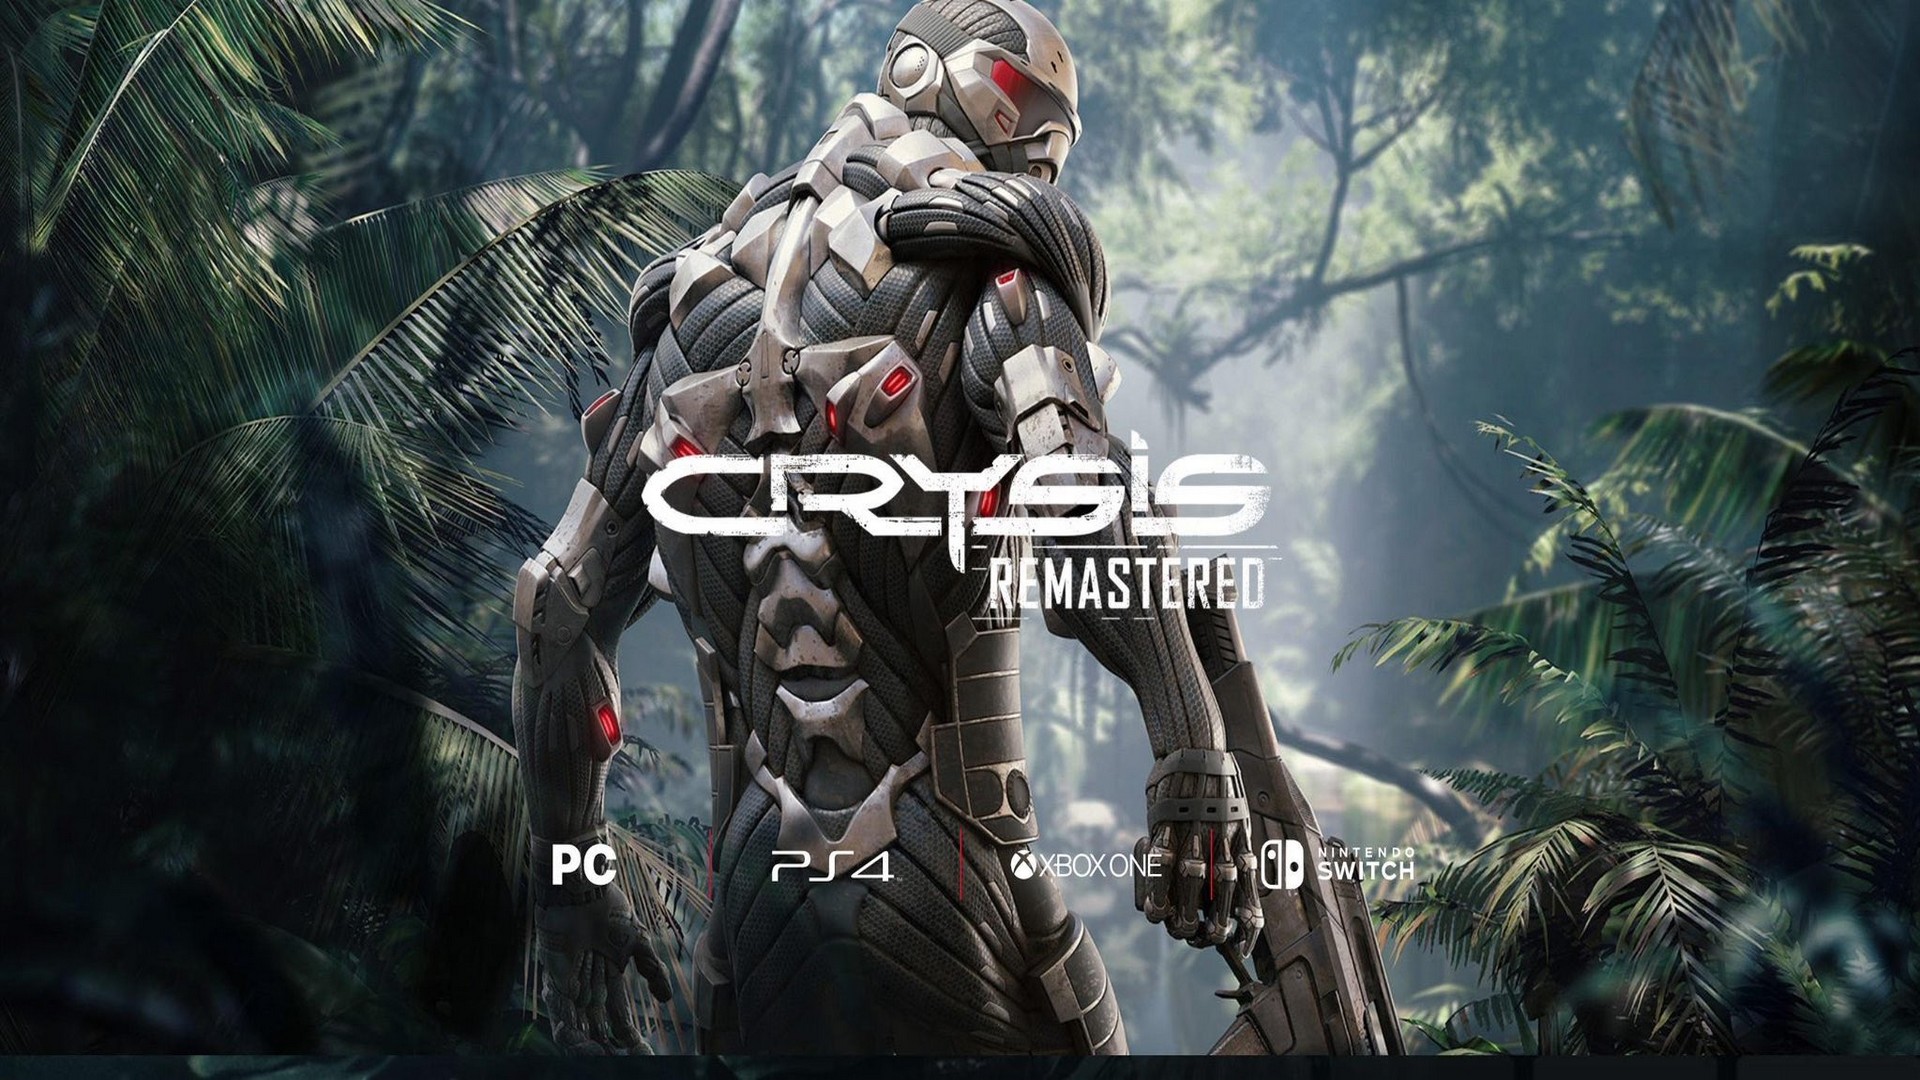 Crysis Remastered fuite sur PC, PS4, Xbox One et Switch